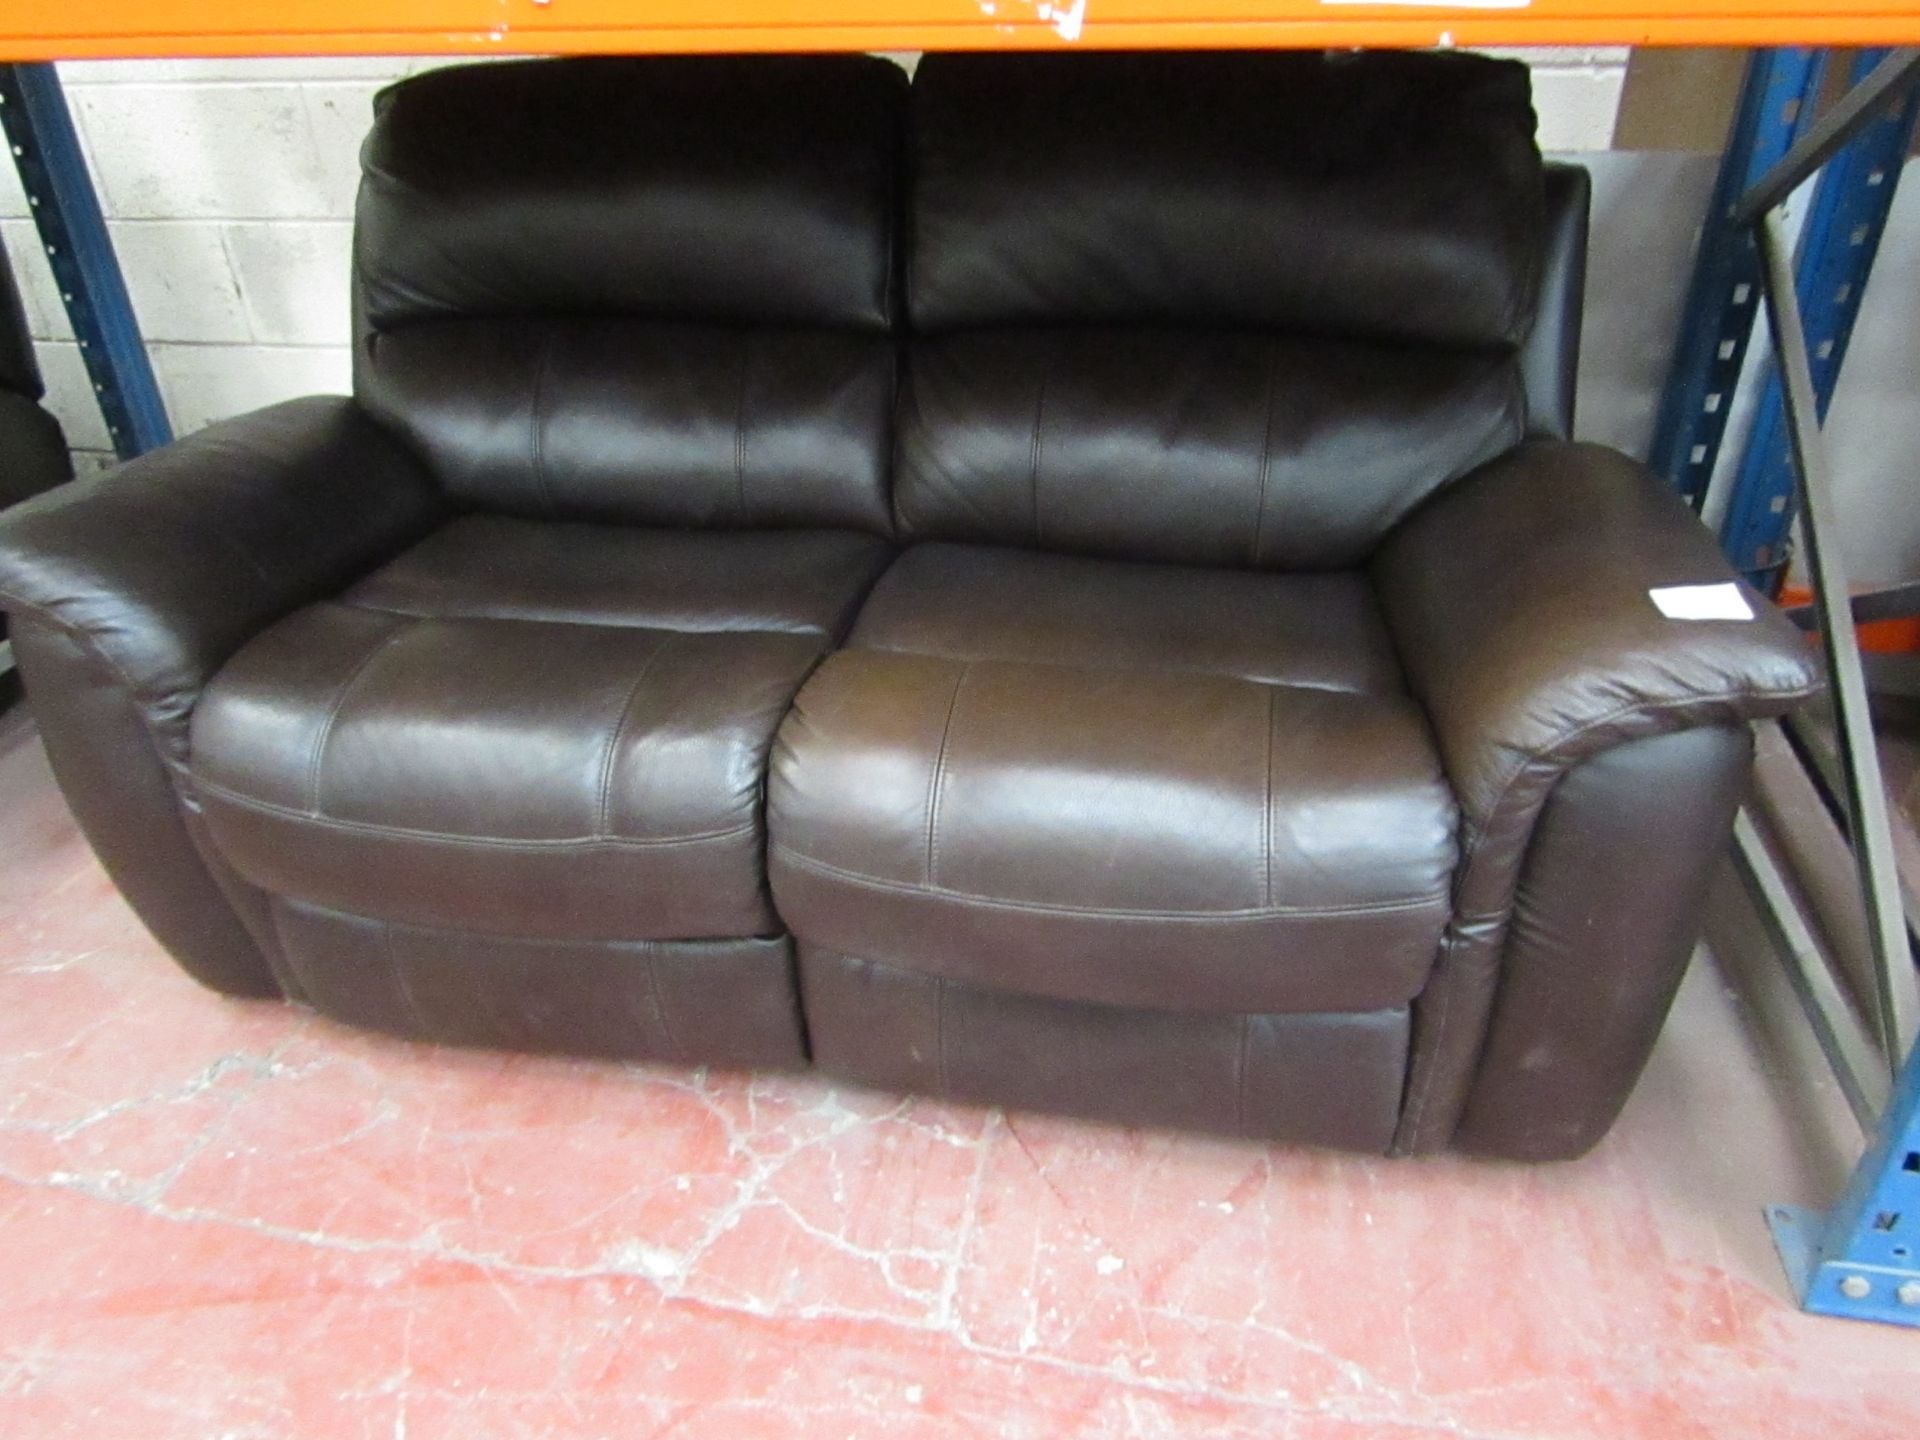 2 seater Leather manual reclining sofa, mechanism is tested working